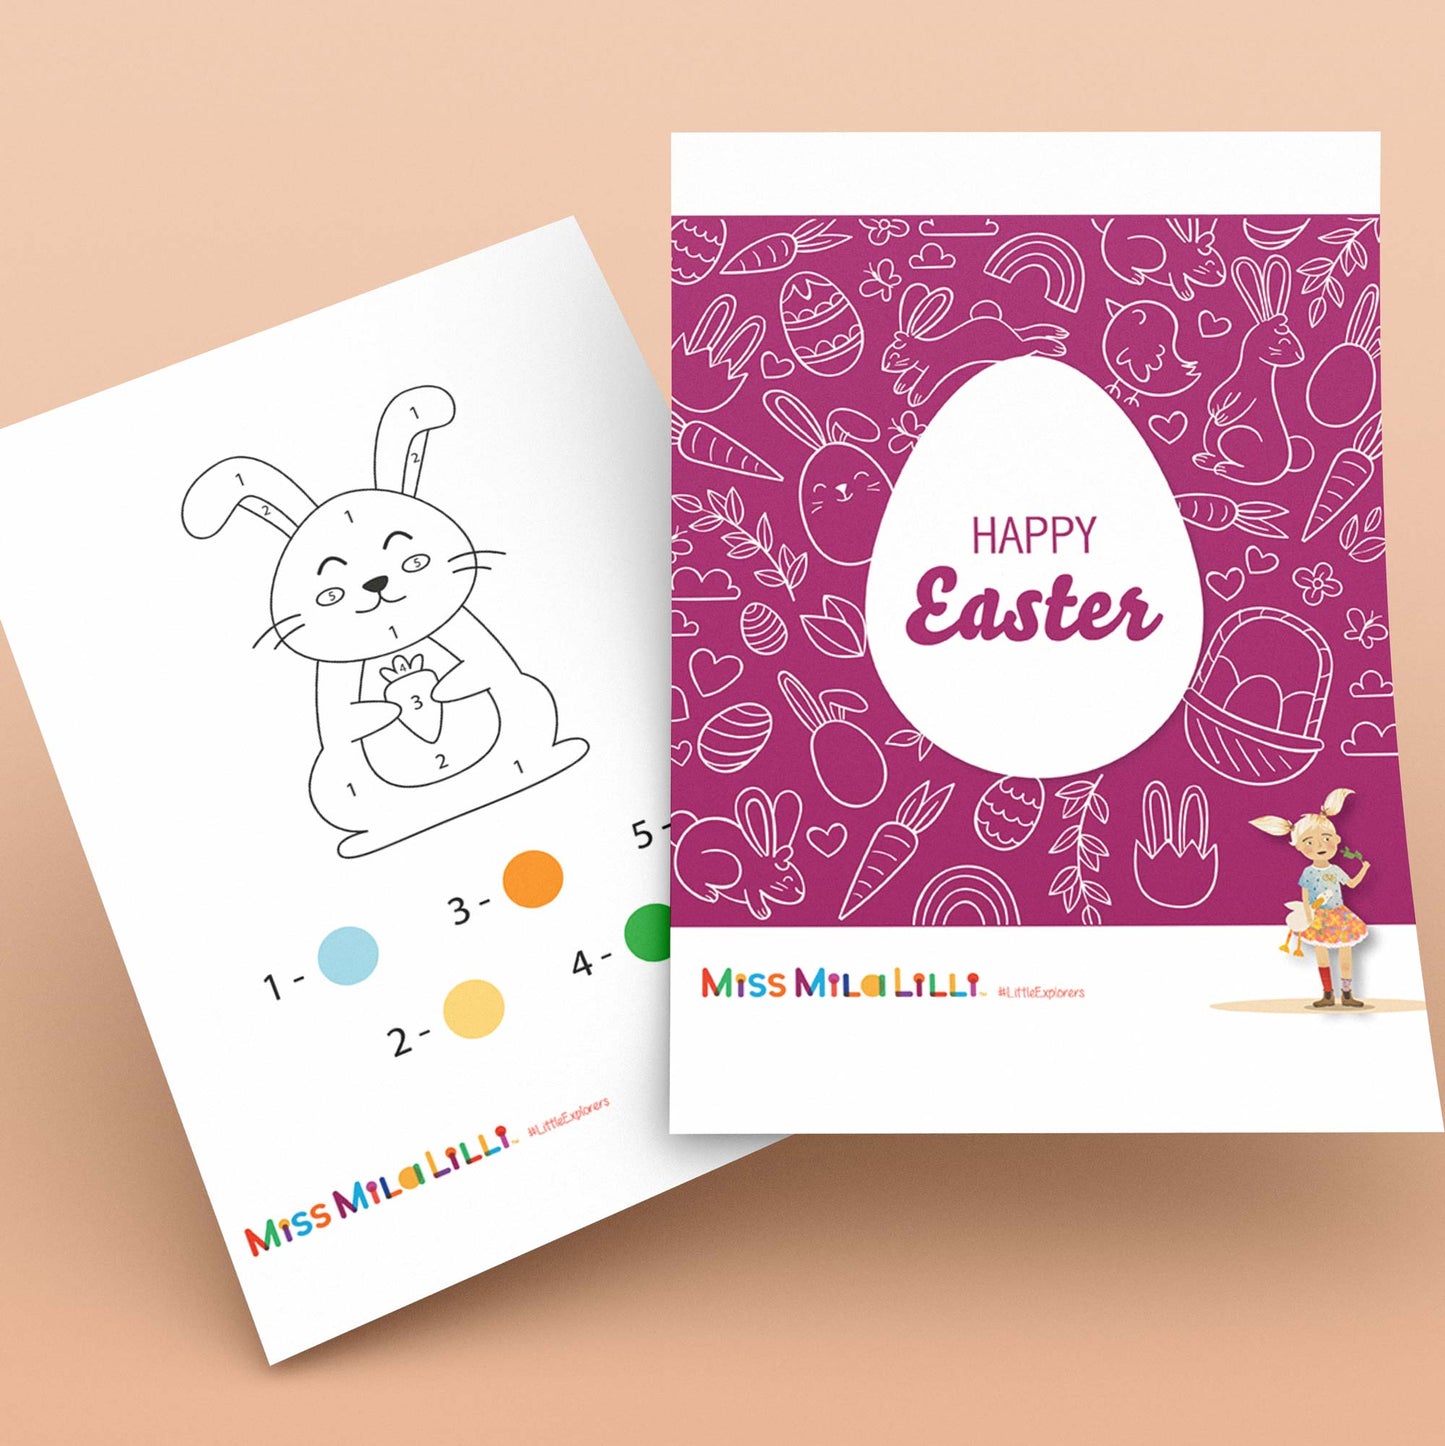 FREE printable Easter activity sheets